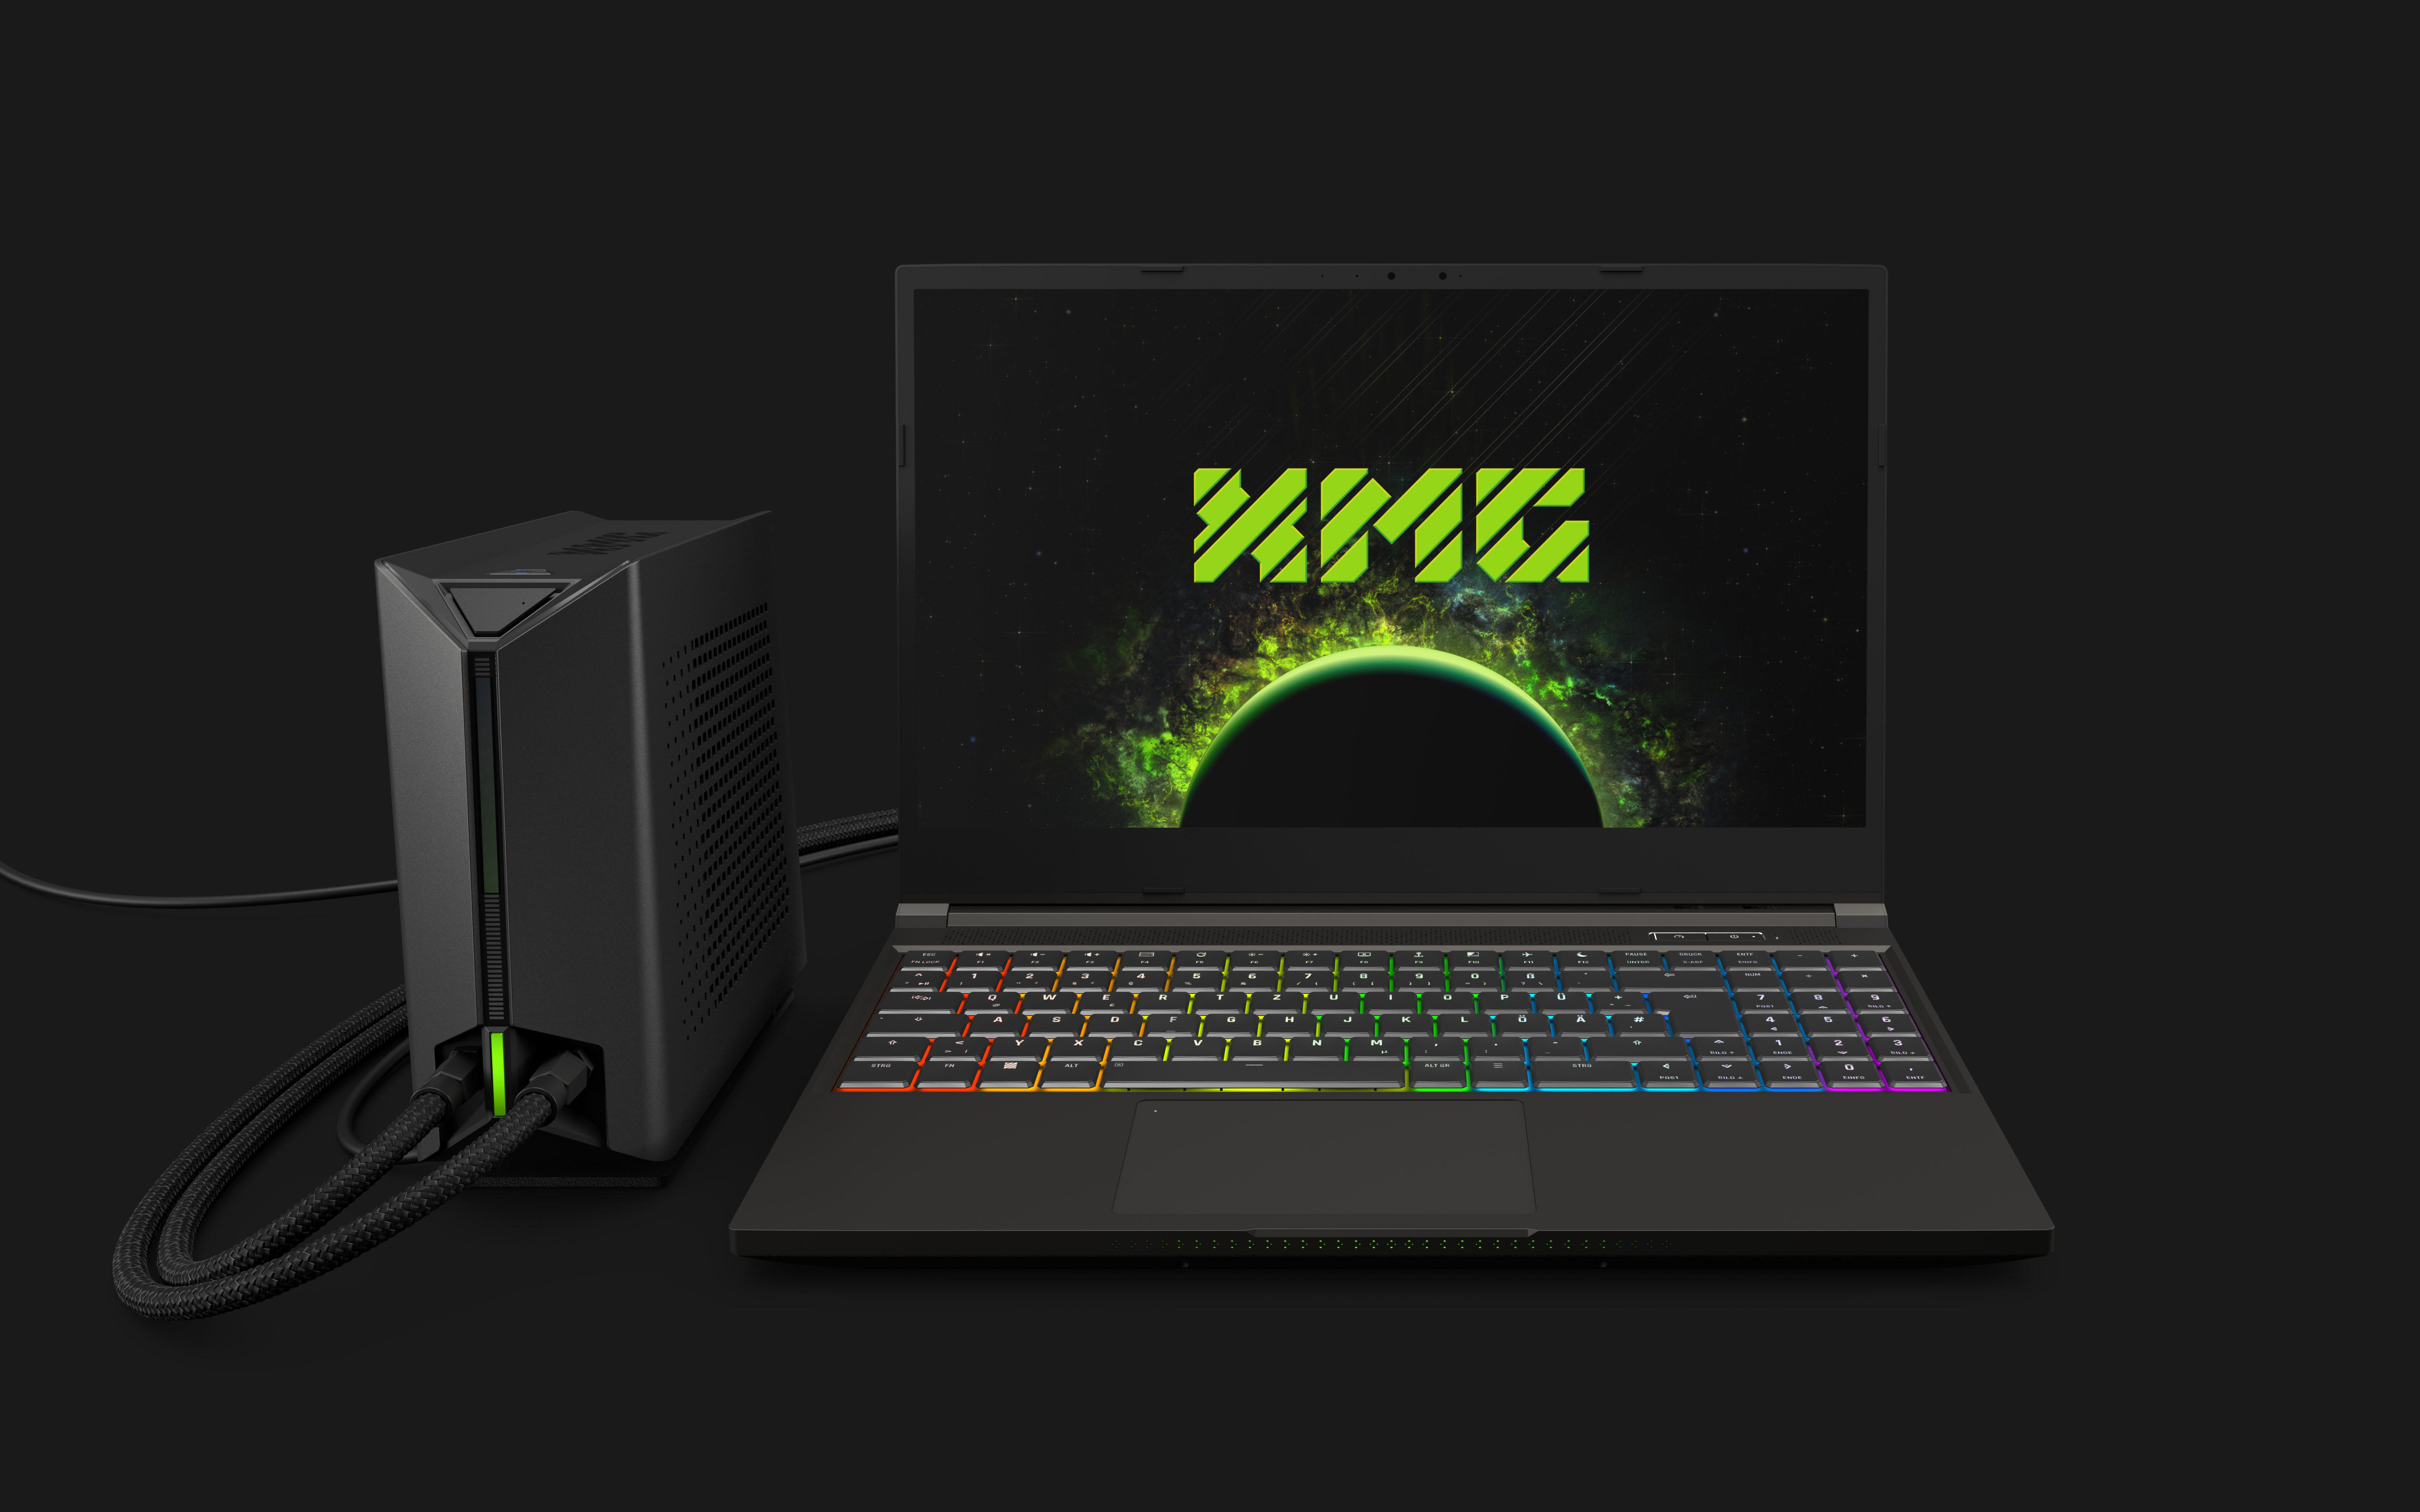 The XMG Neo 15 laptop hooked up to the XMG Oasis liquid cooling system